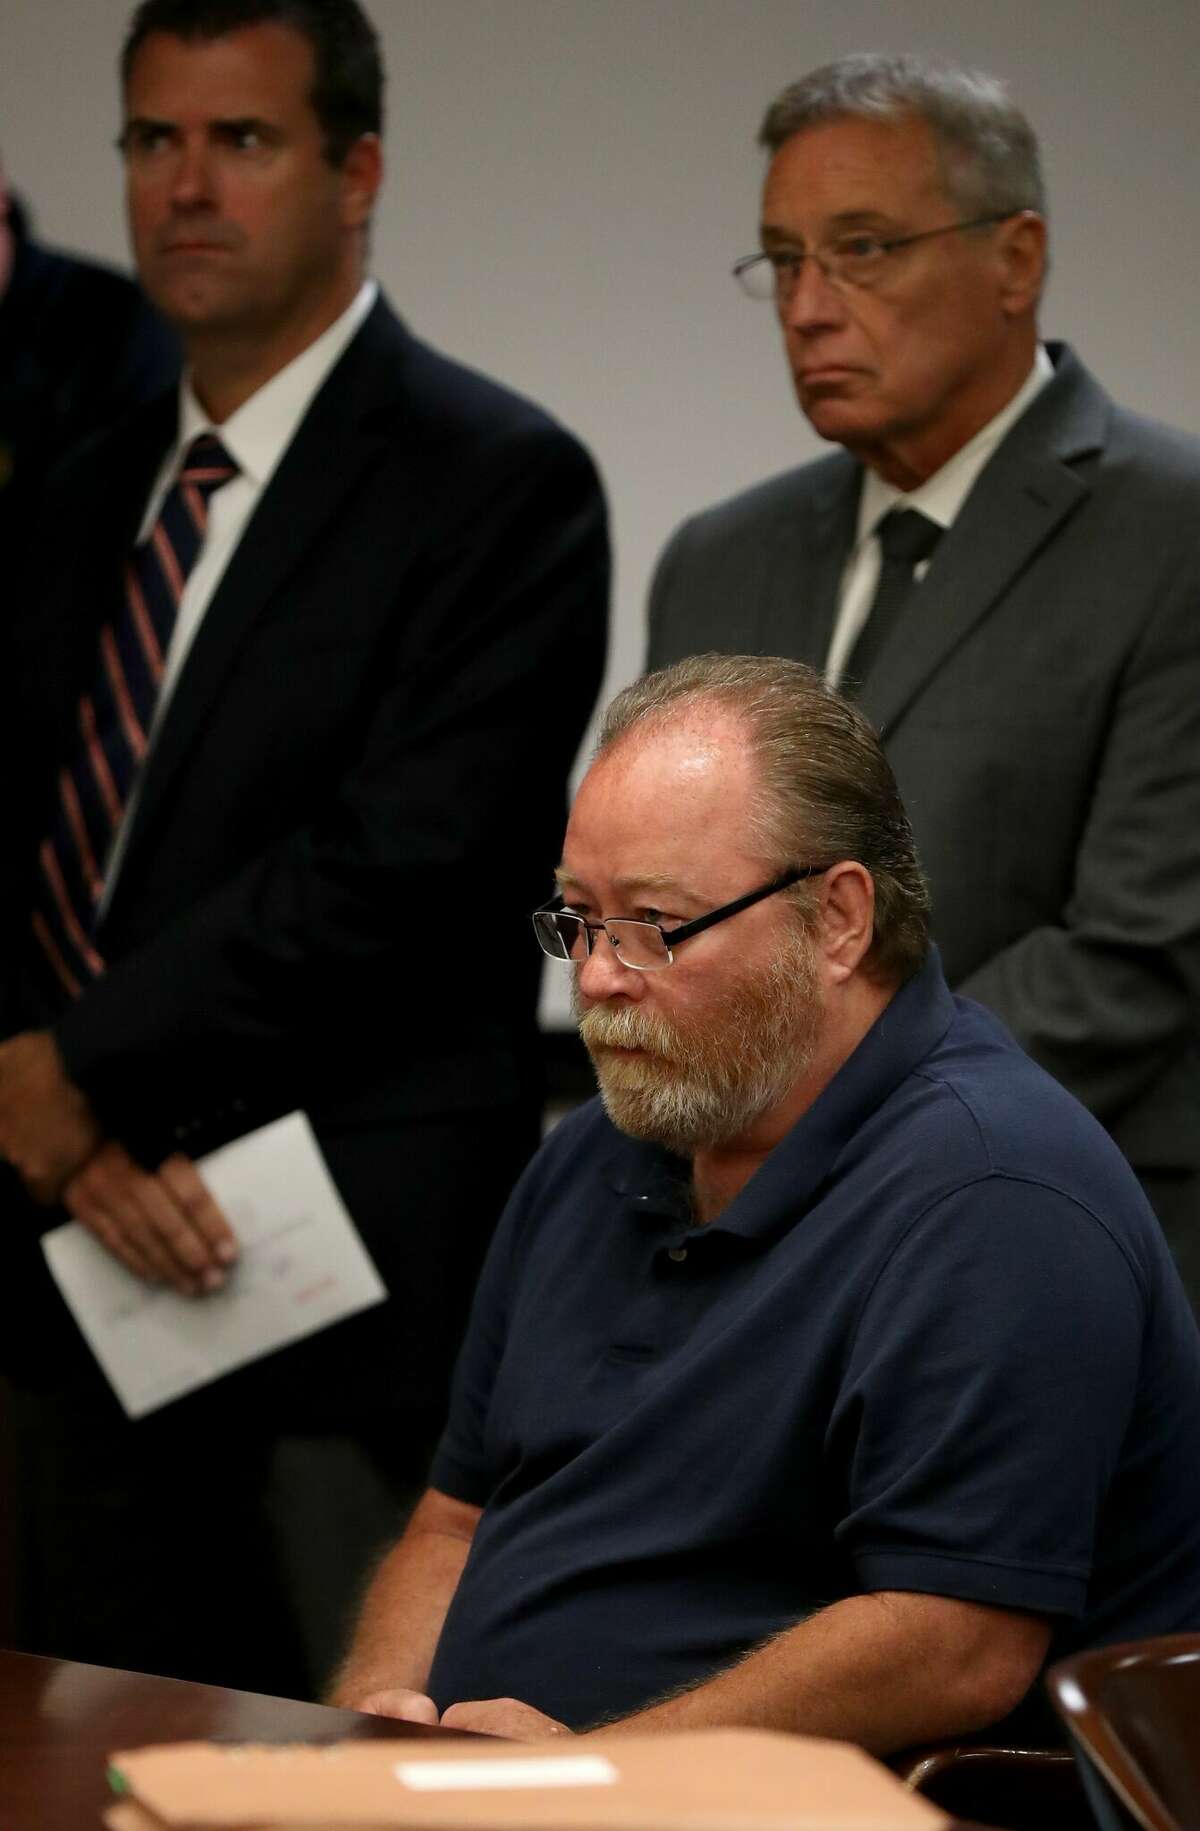 William Reece sits in 405th District Court Judge Jared Robinson’s courtroom in Galveston, Texas on Wednesday, June 29, 2022, after pleading guilty to two felony murder charges for the deaths of Laura Kate Smither and Jessica Cain in 1997. 